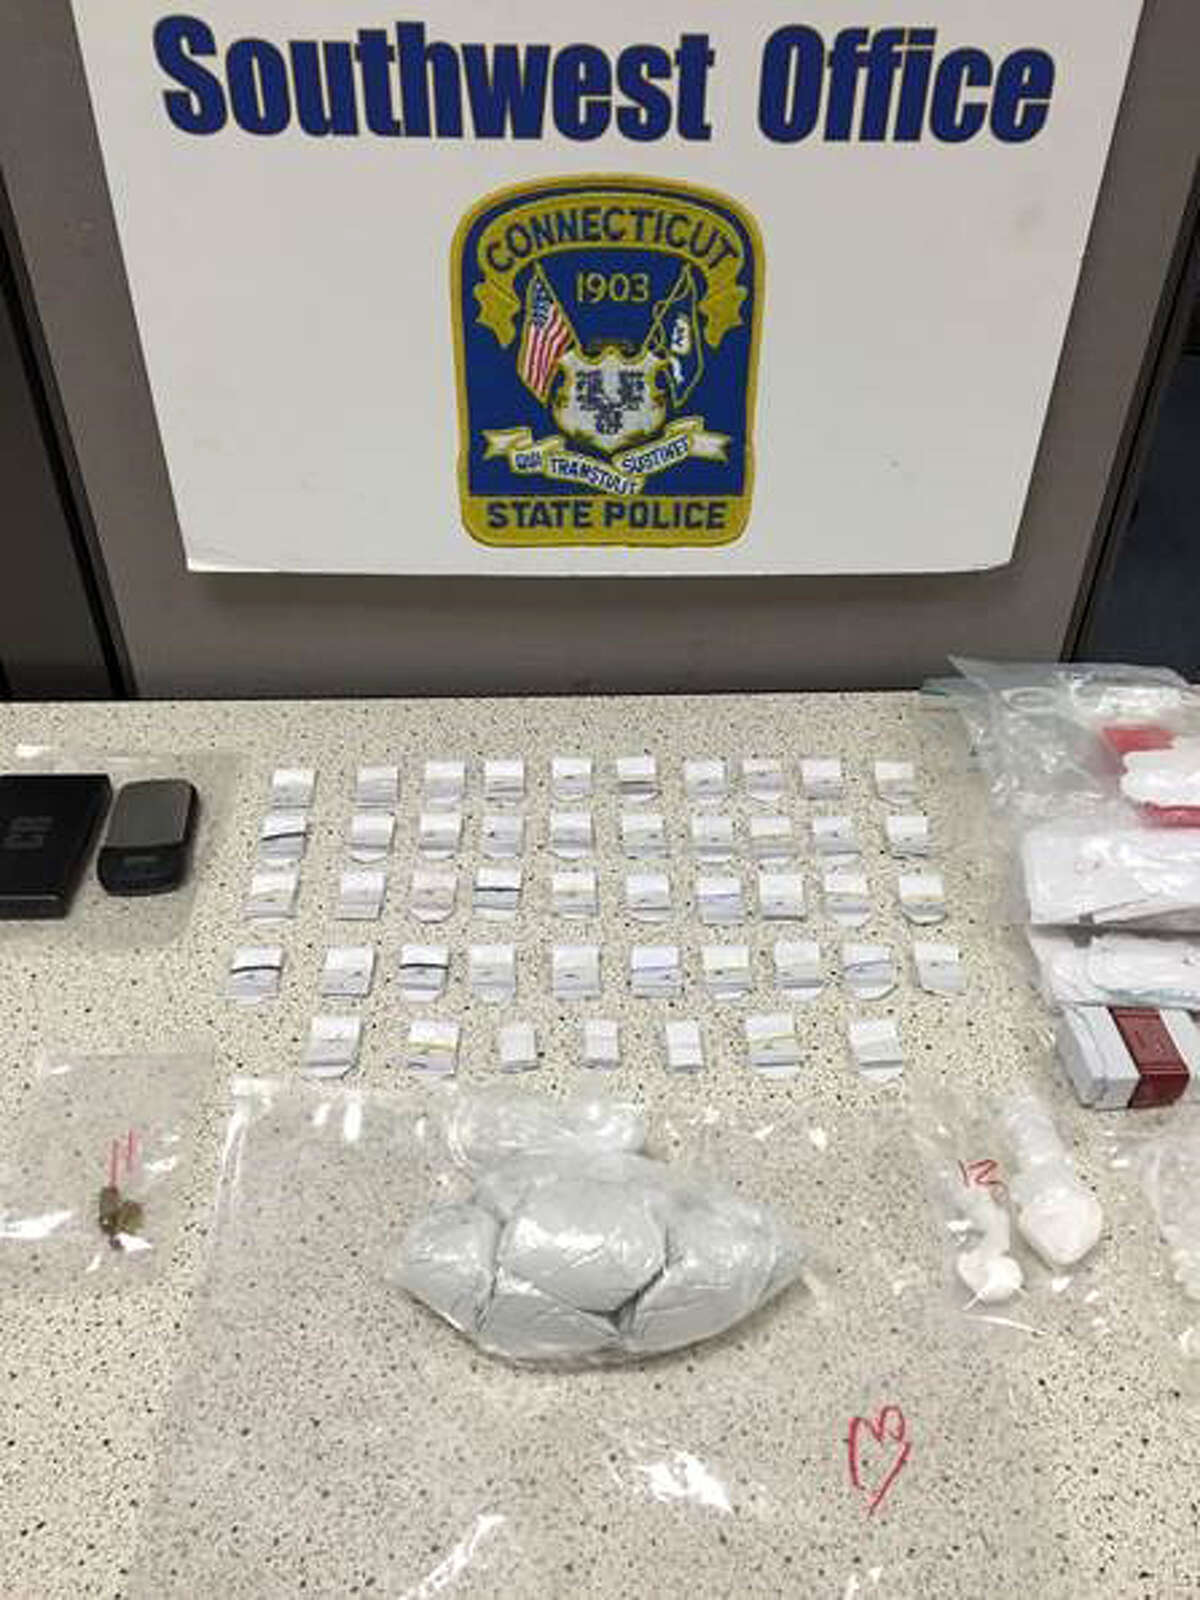 An investigation into a suspected major seller of heroin in the area resulted Thursday, April 7, 2016, in the seizure of more than 400 bags of heroin and three arrests.